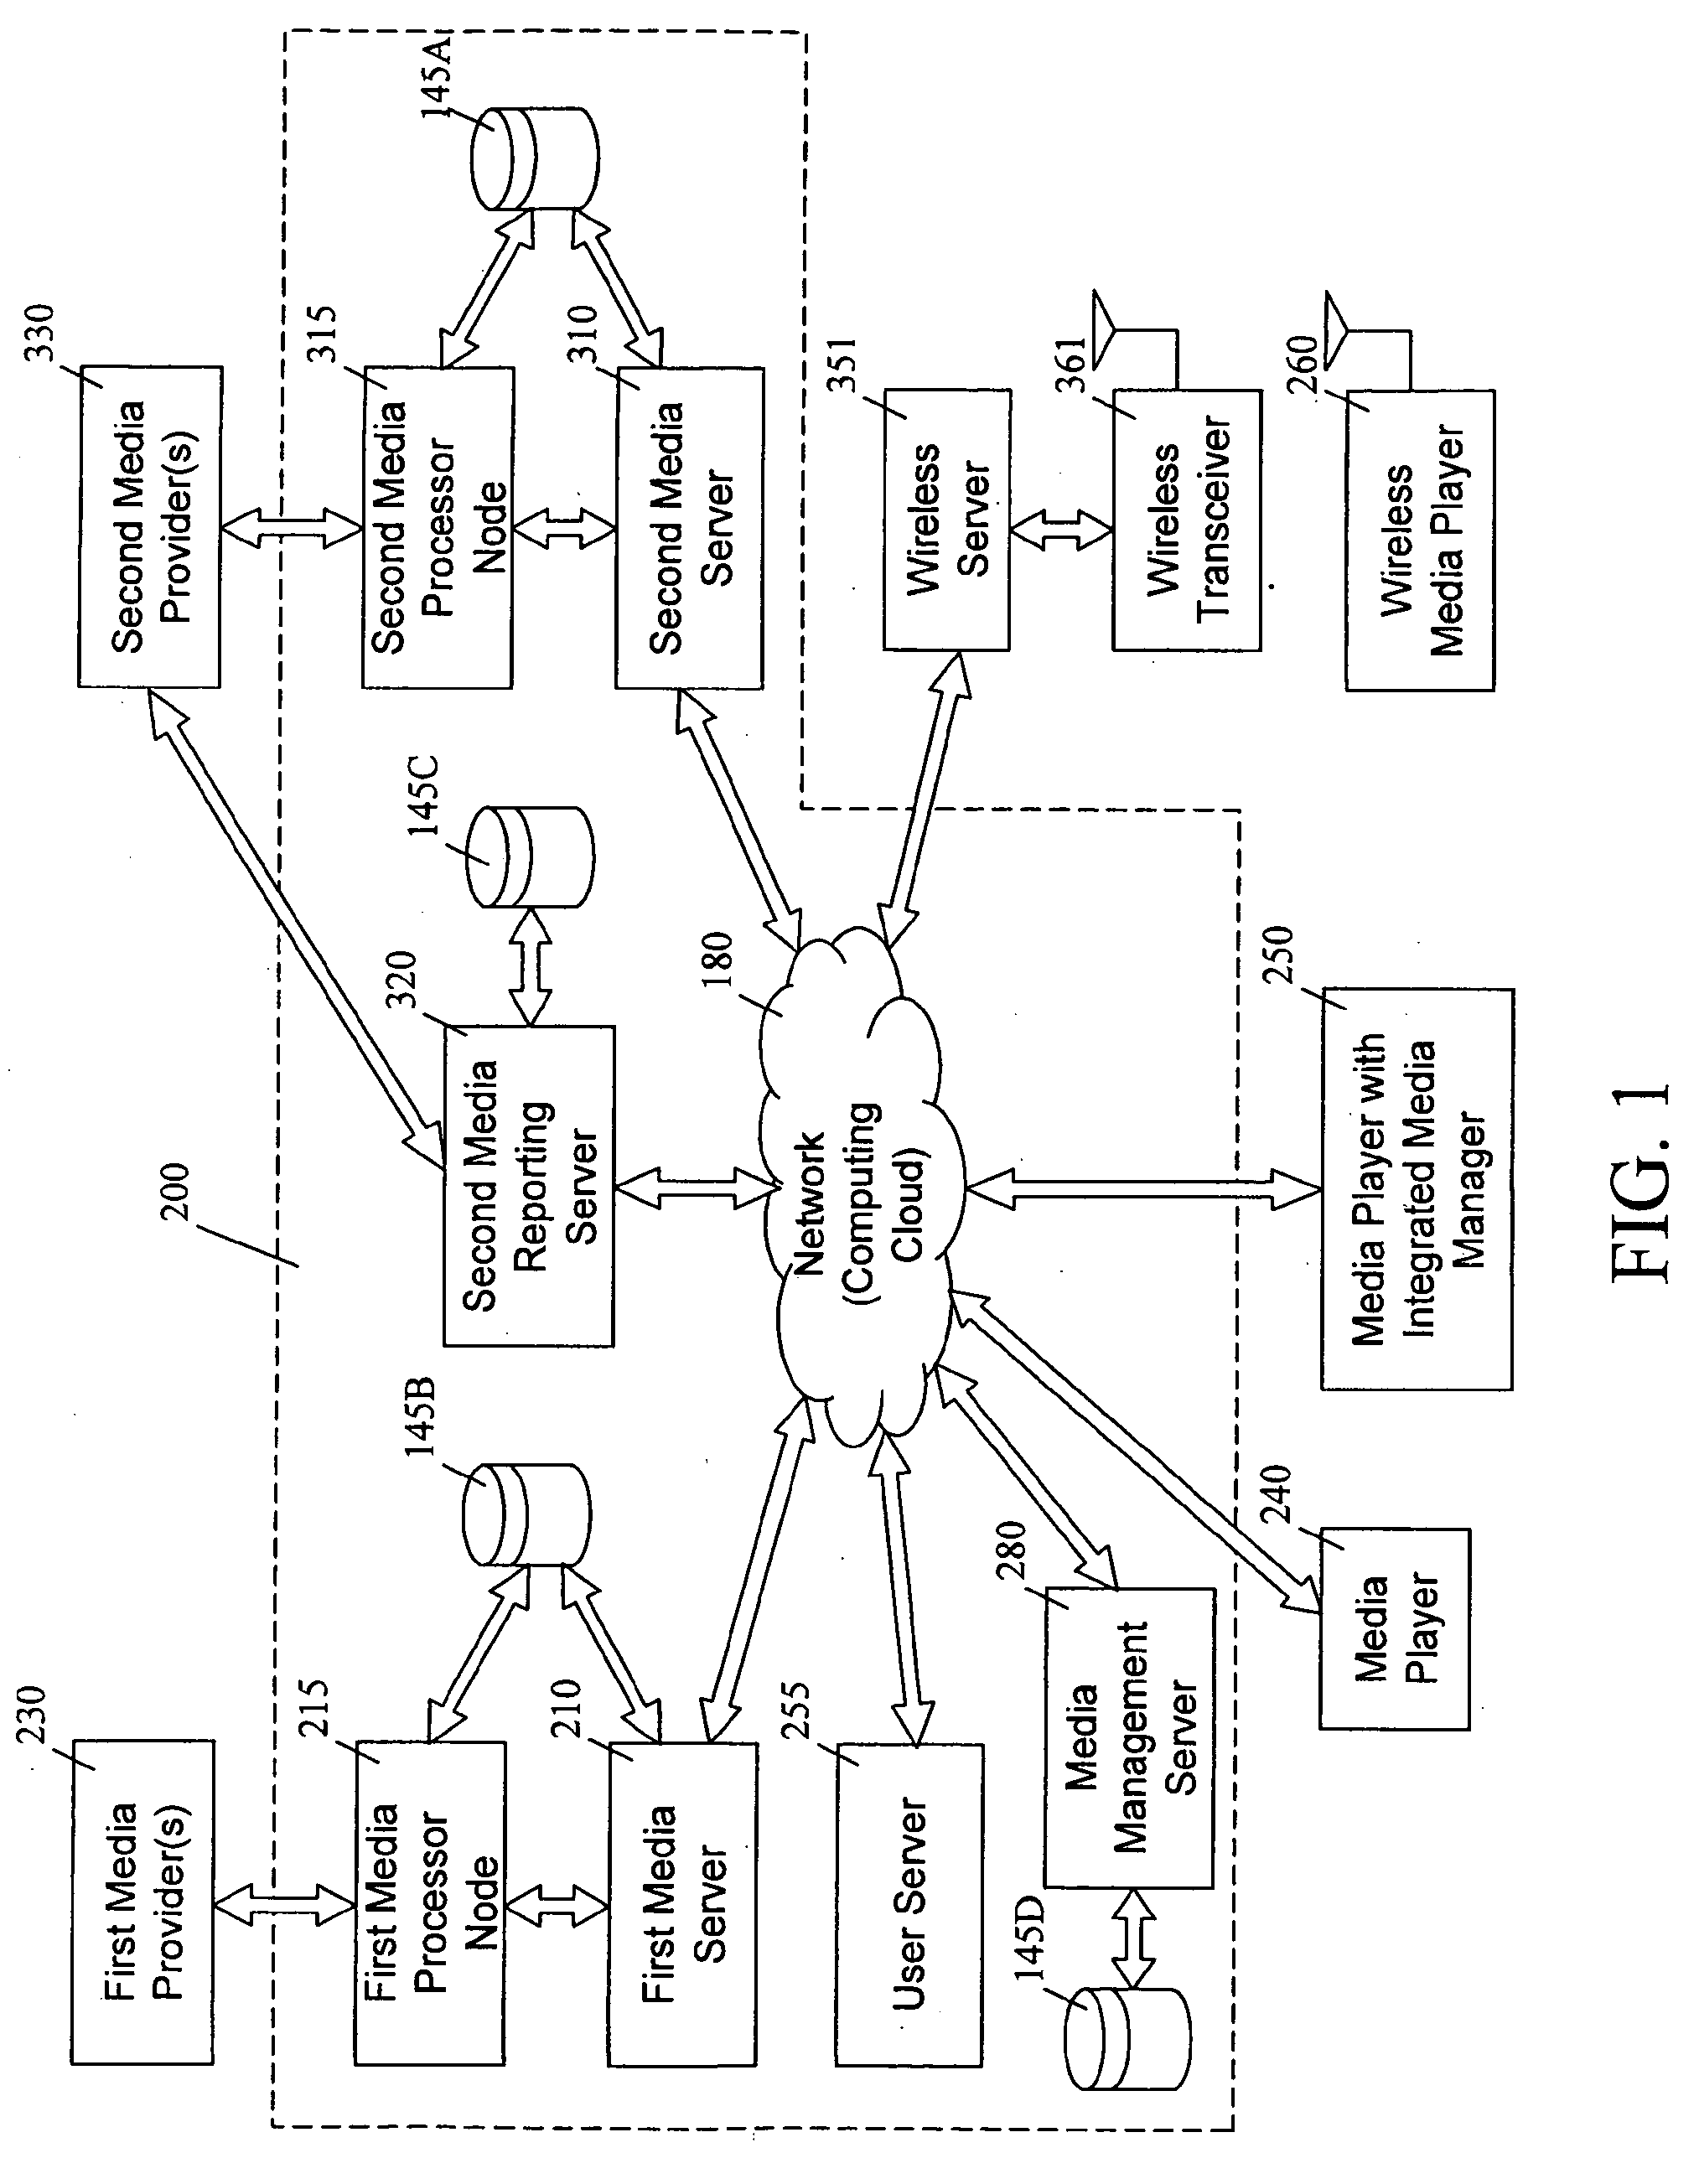 Media Distribution Reporting System, Apparatus, Method and Software